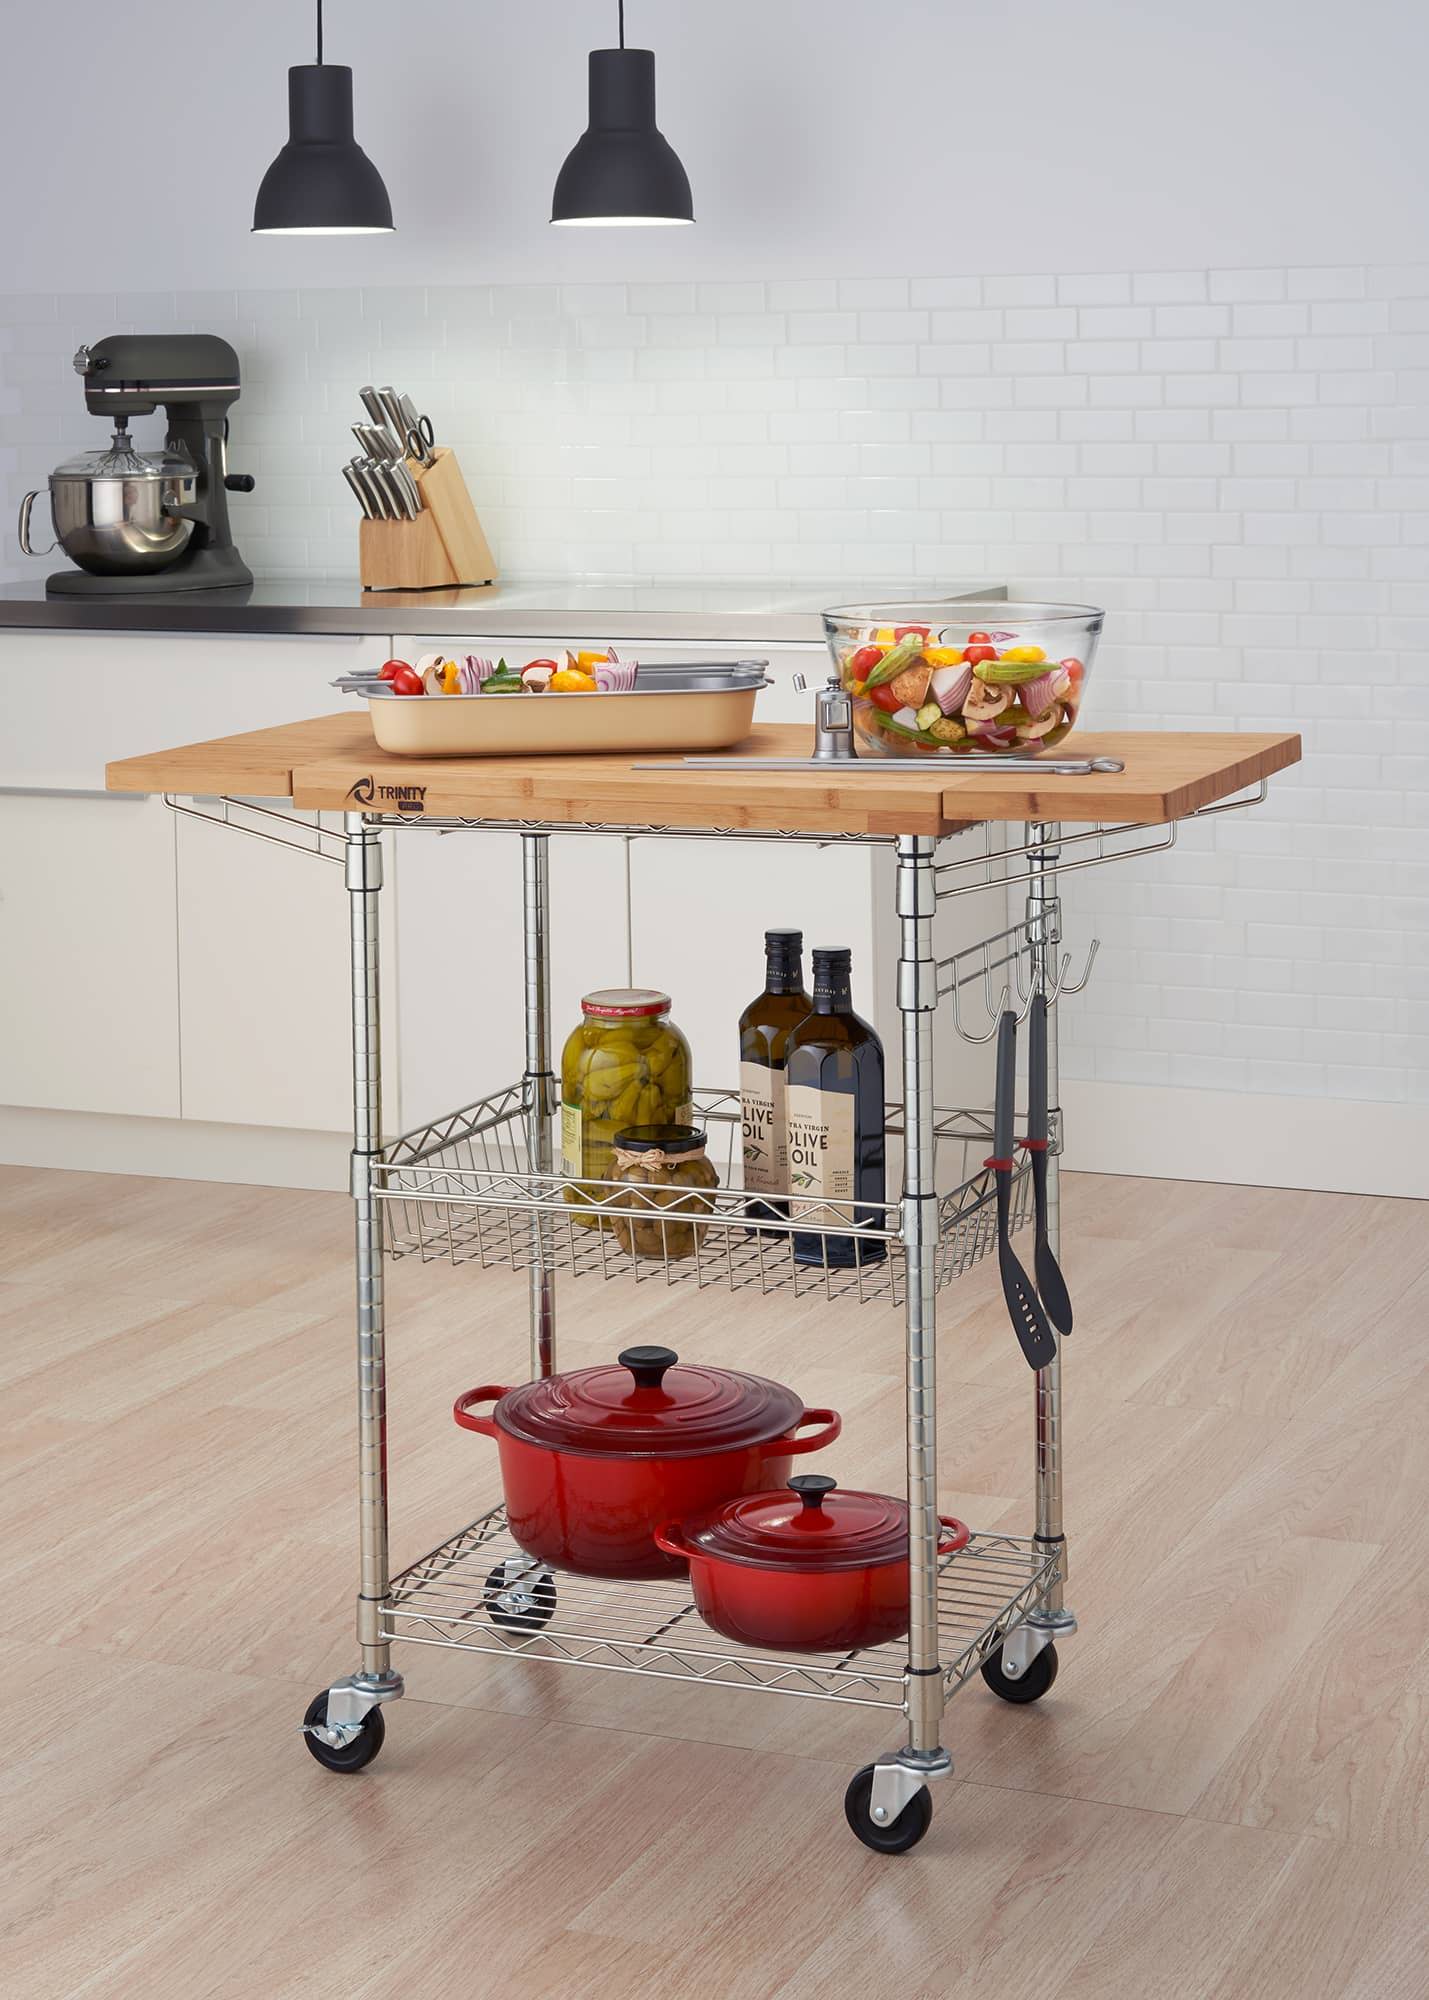 chrome kitchen cart in the middle of the room